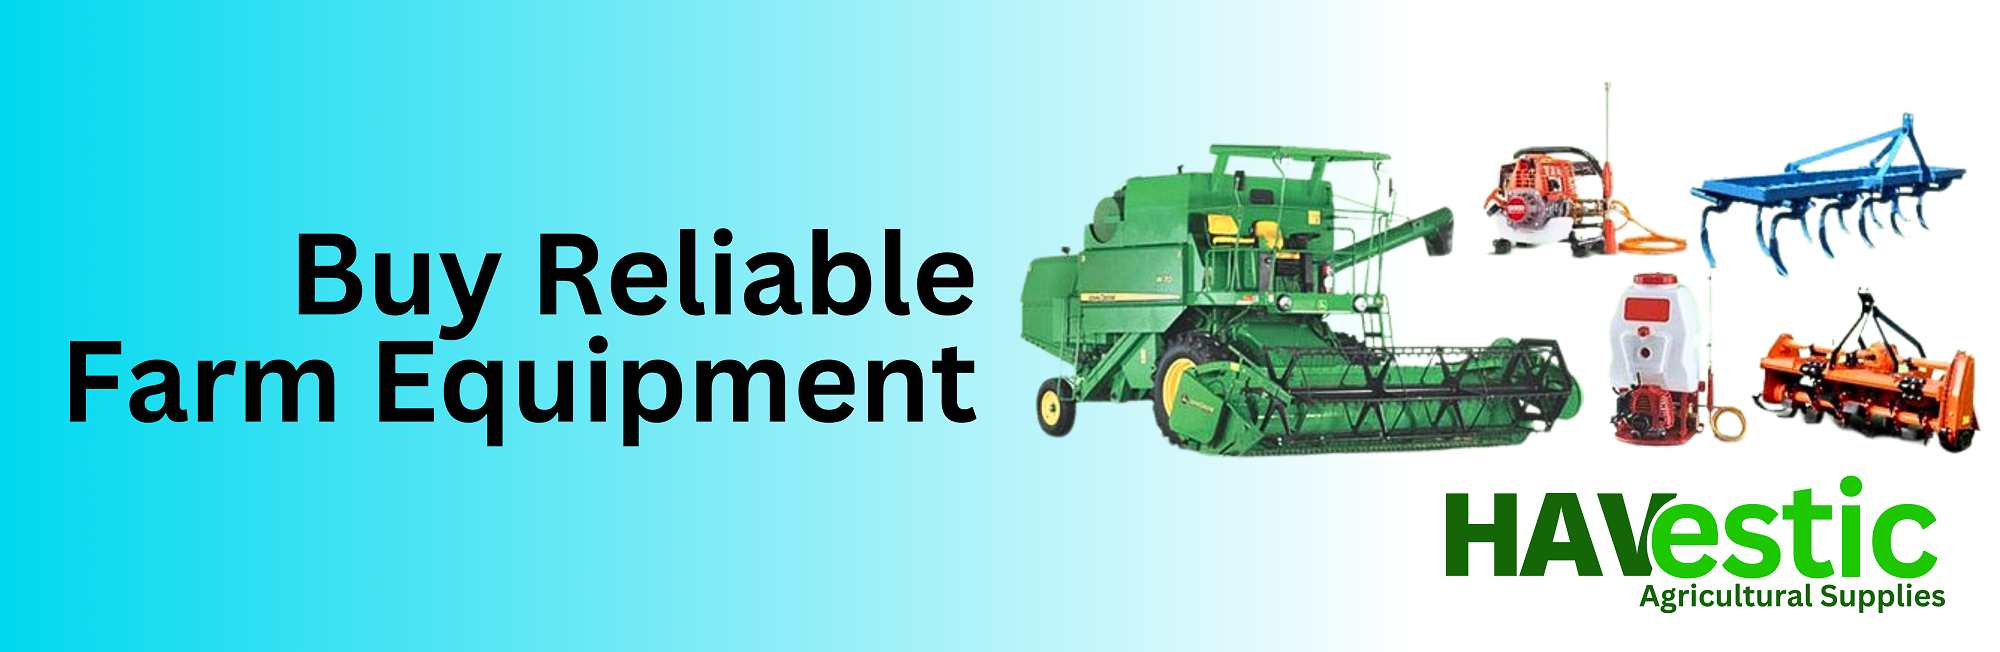 Buy reliable Agricultural Equipment